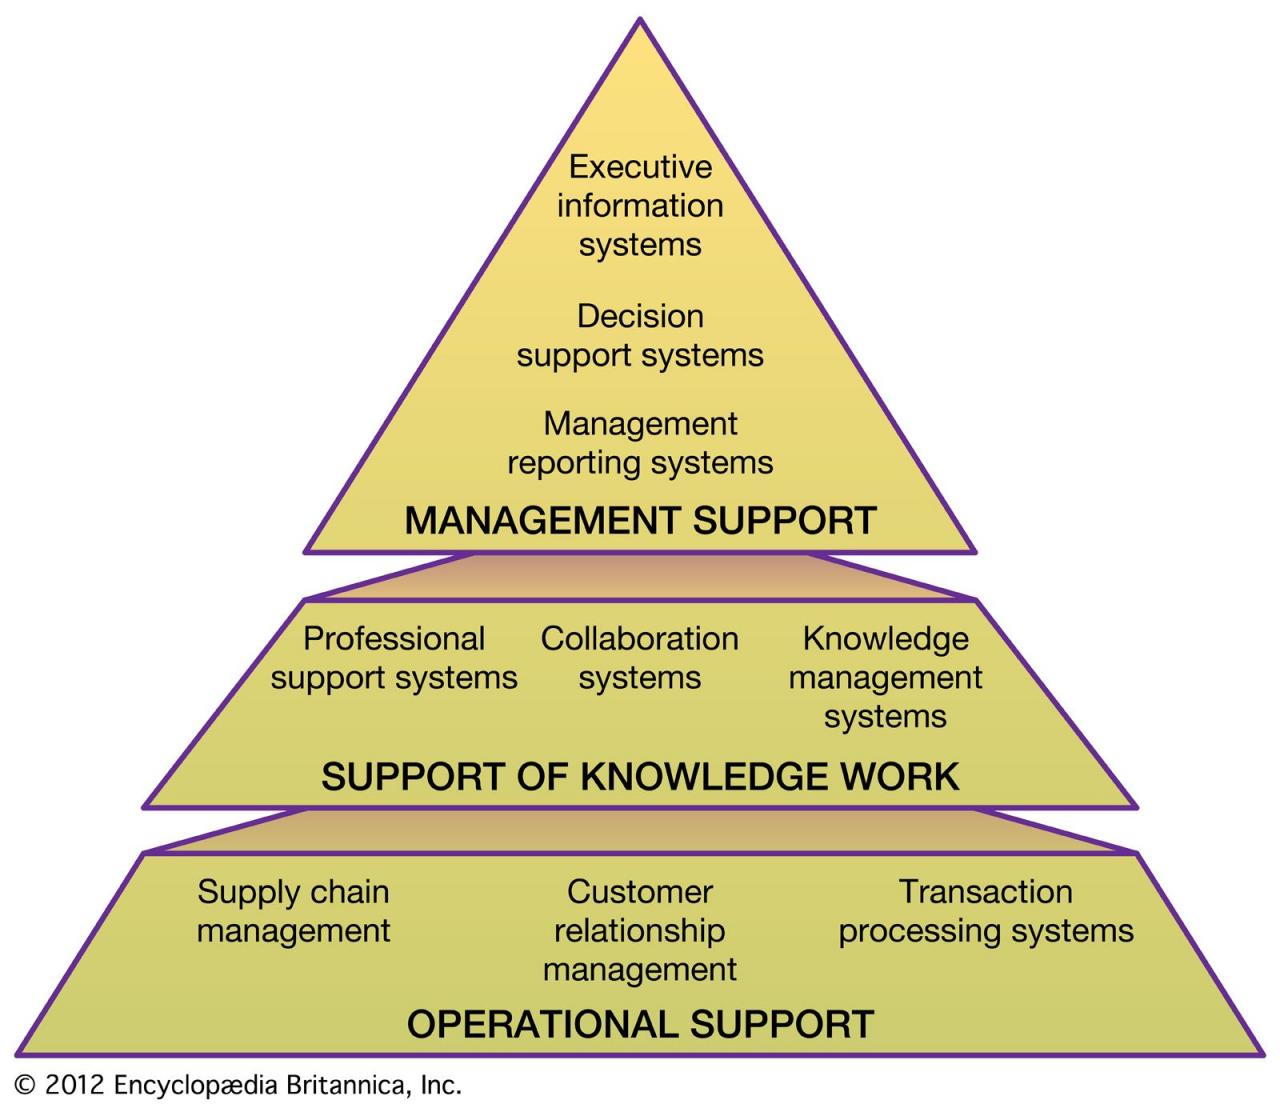 How to improve management information system in an organization